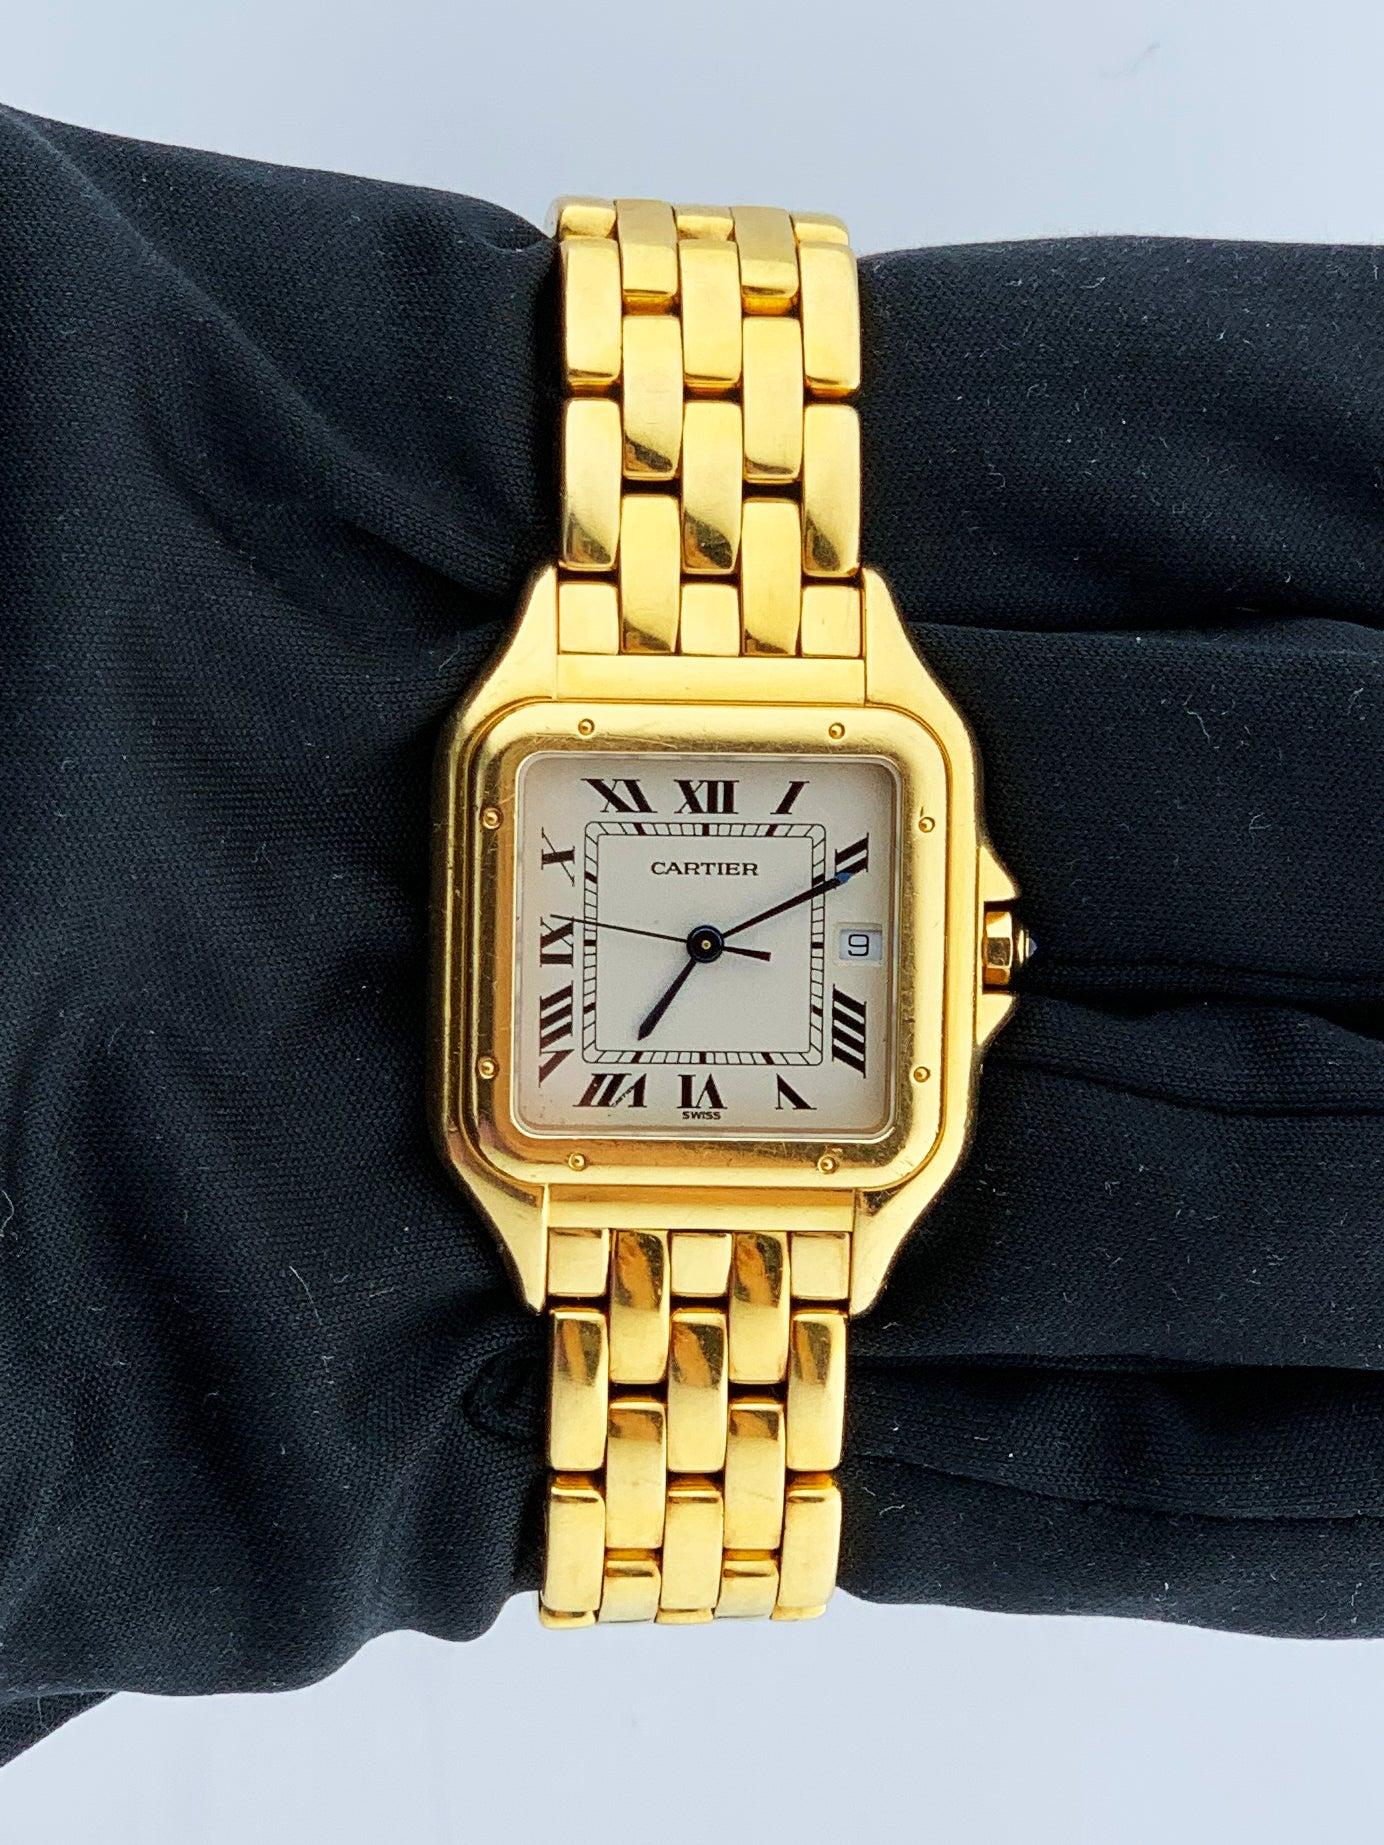 Cartier Panthere 883968 Large Mens Watch. 29mm 18K yellow gold case with 18K yellow gold smooth bezel. Off-White dial with Blue steel hands and black Roman numeral hour markers. Minute markers on the inner dial. Date display at the 3 o'clock